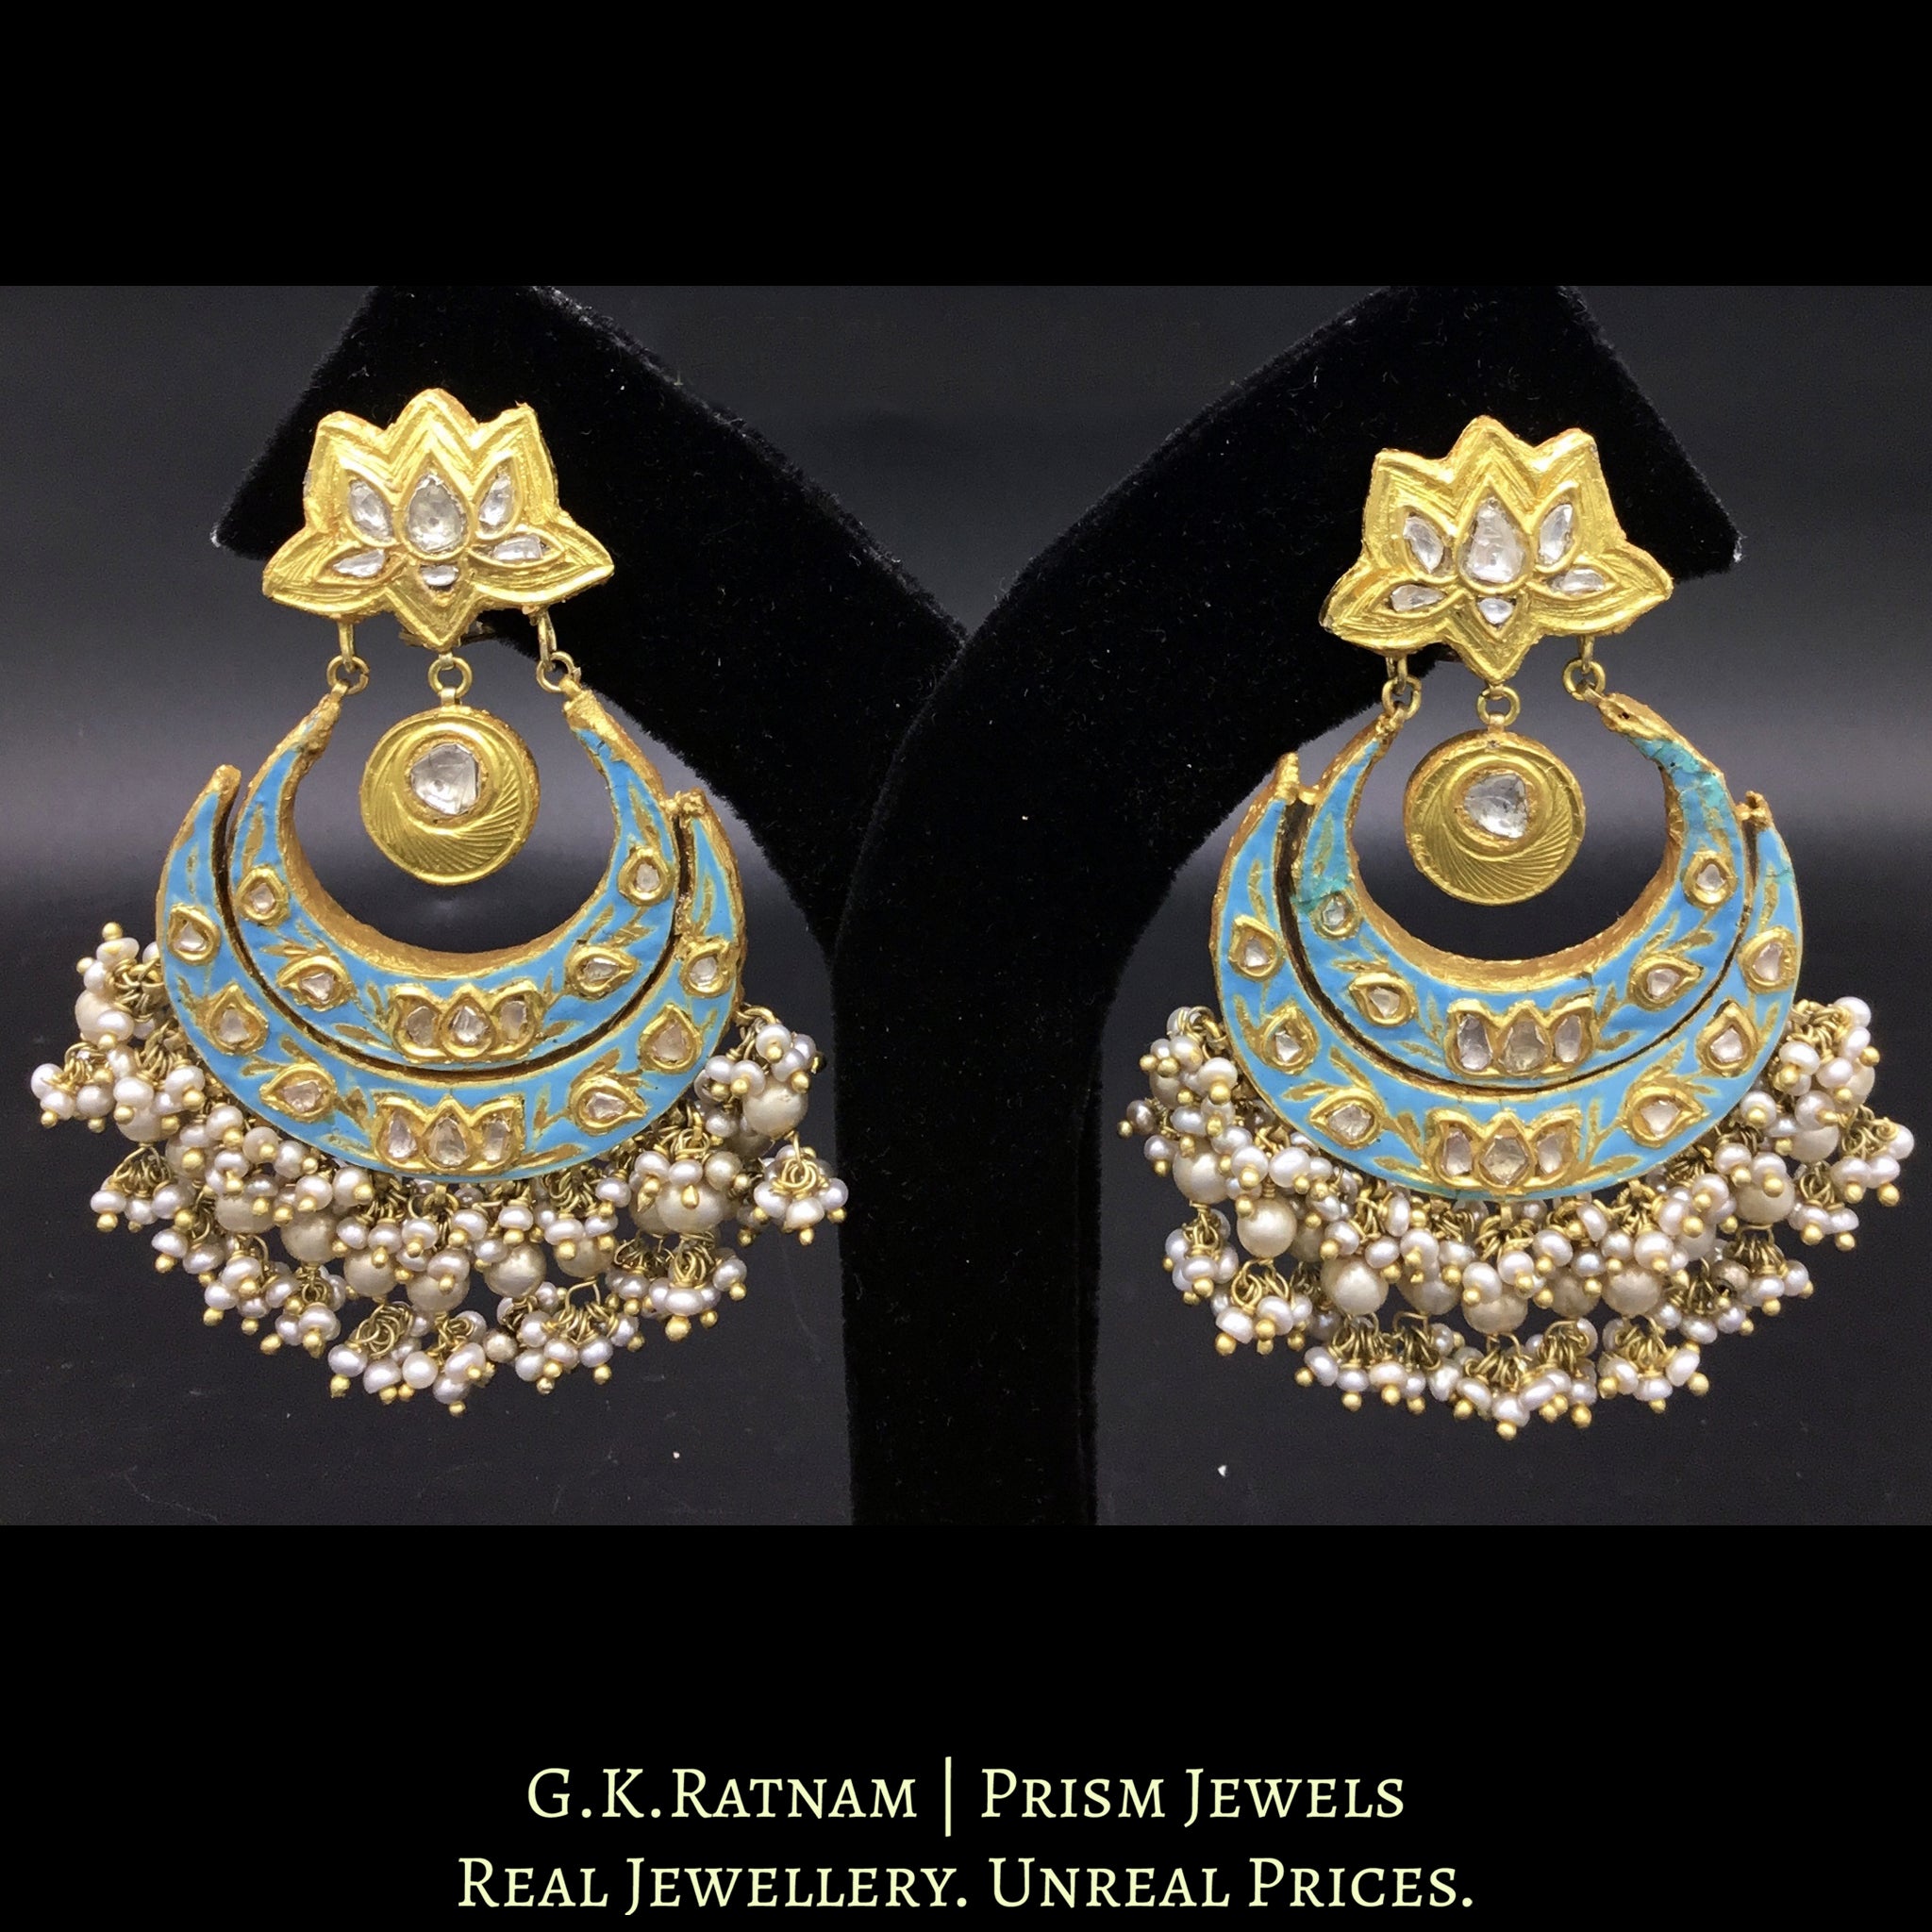 23k Gold and Diamond Polki Reversible Chand Bali Earring Pair with intricate enamelling